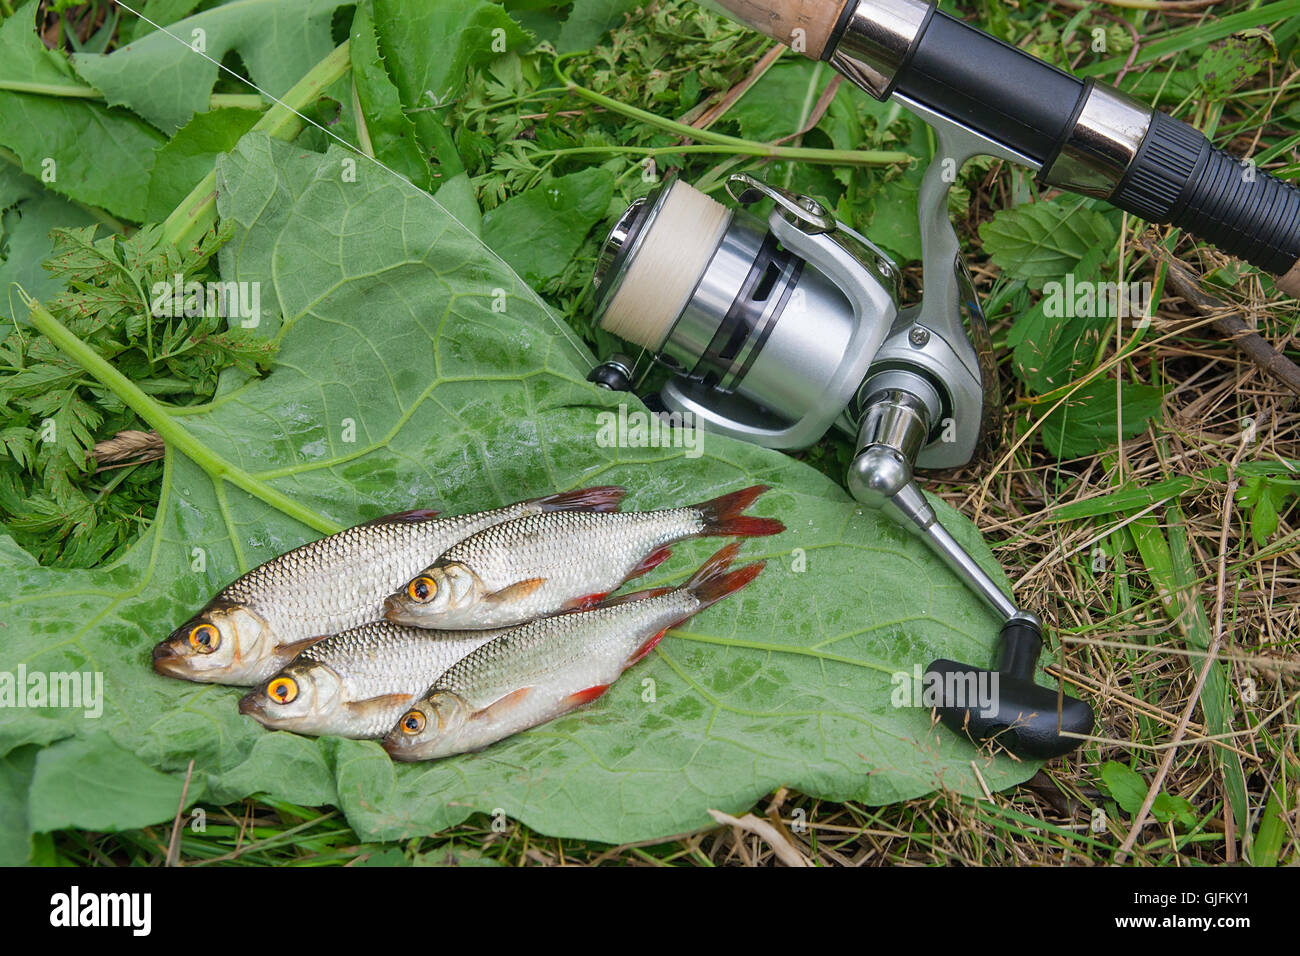 Freshwater fish just taken from the water. Catching freshwater fish and fishing rods with fishing reel. Several common rudd fish Stock Photo